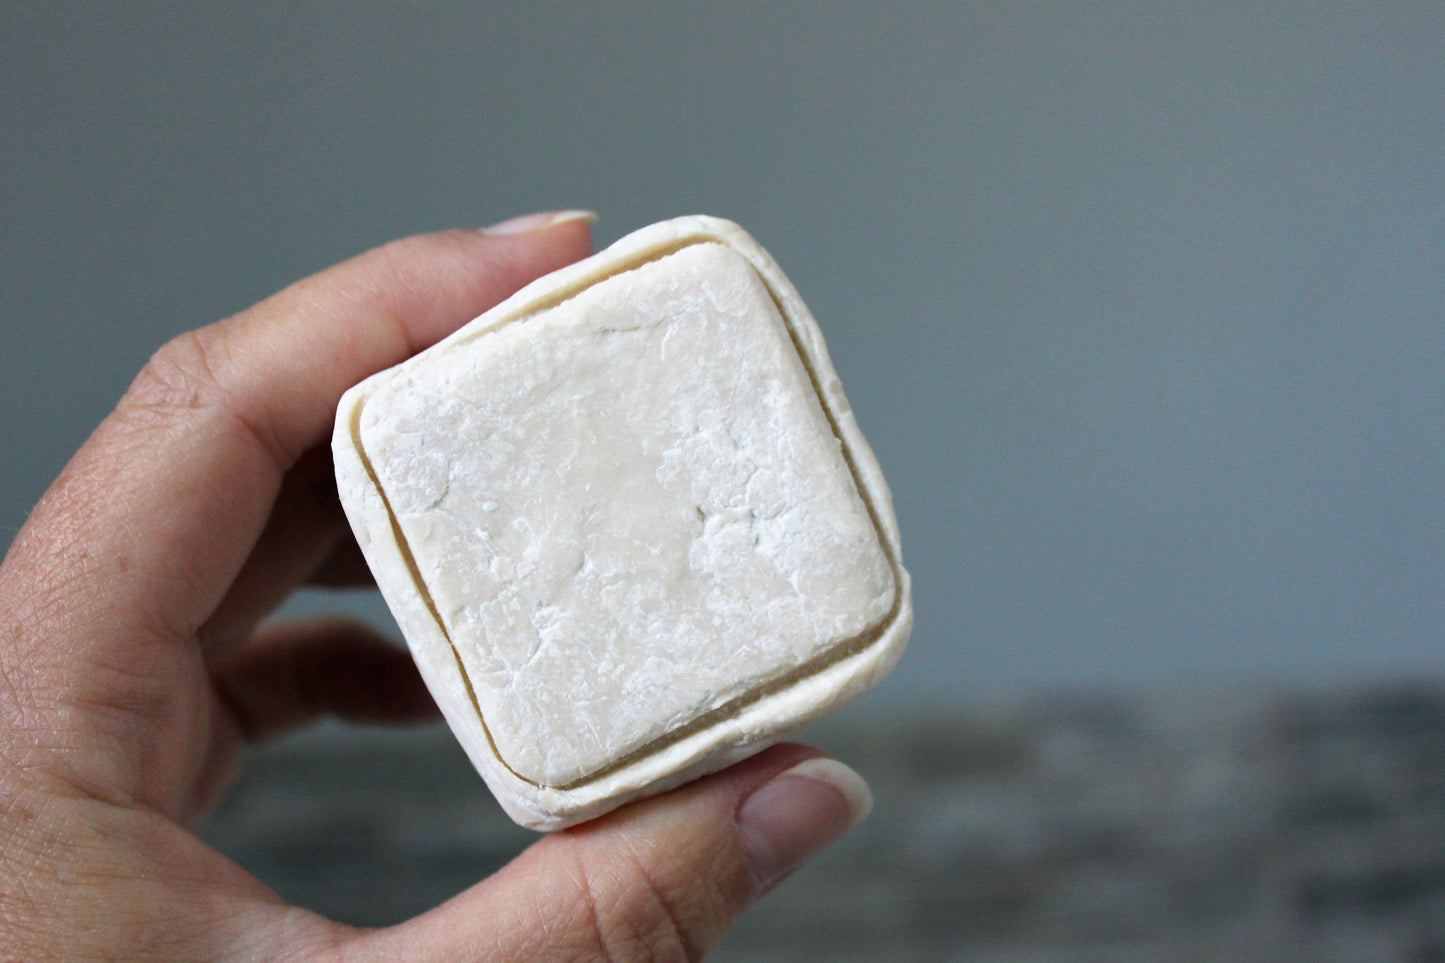 Gentle Clay Facial Cleansing Bar